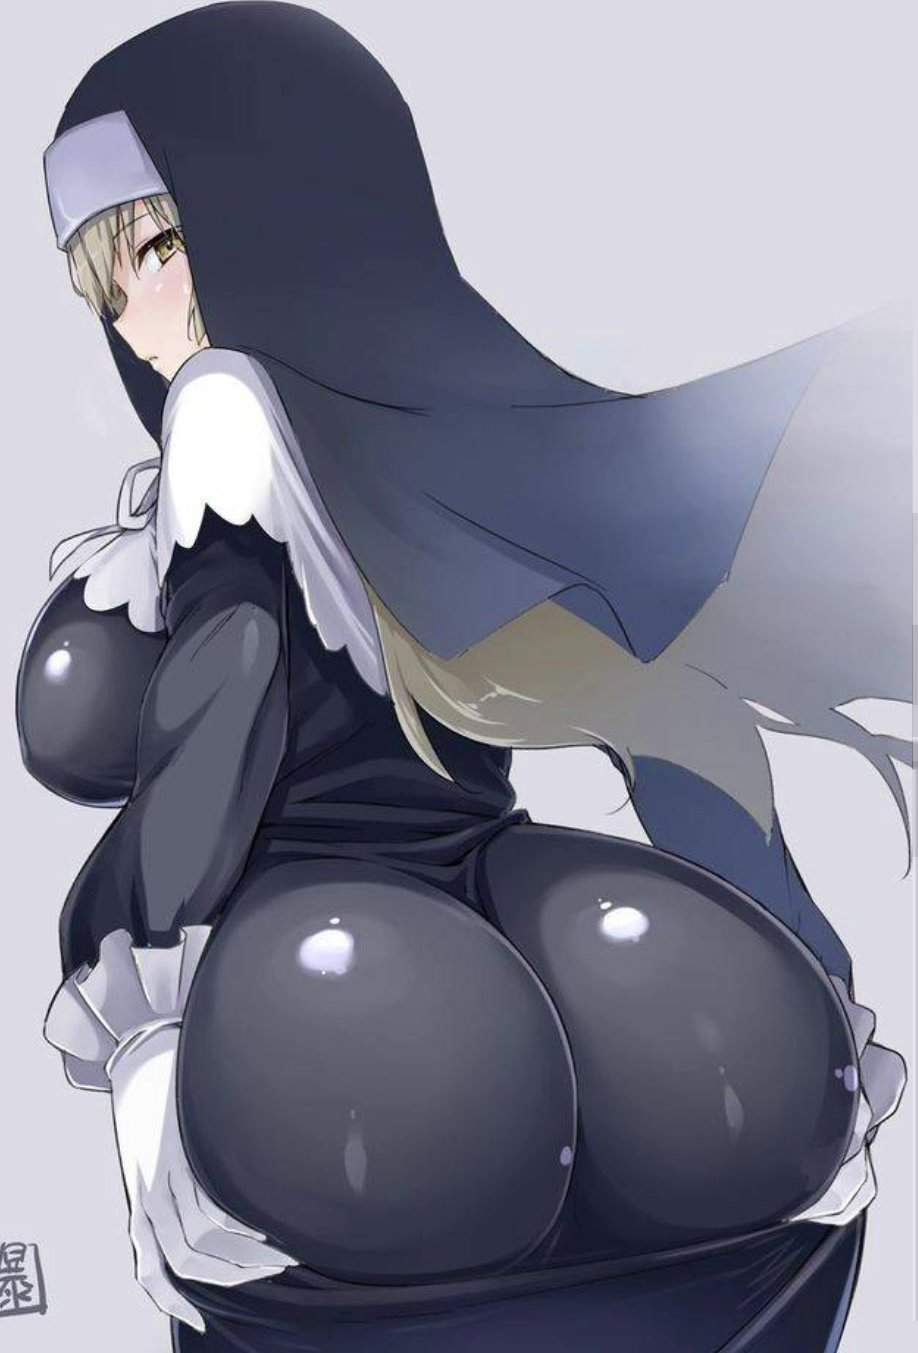 Thicc Nun's Heavenly Farts - ThisVid.com